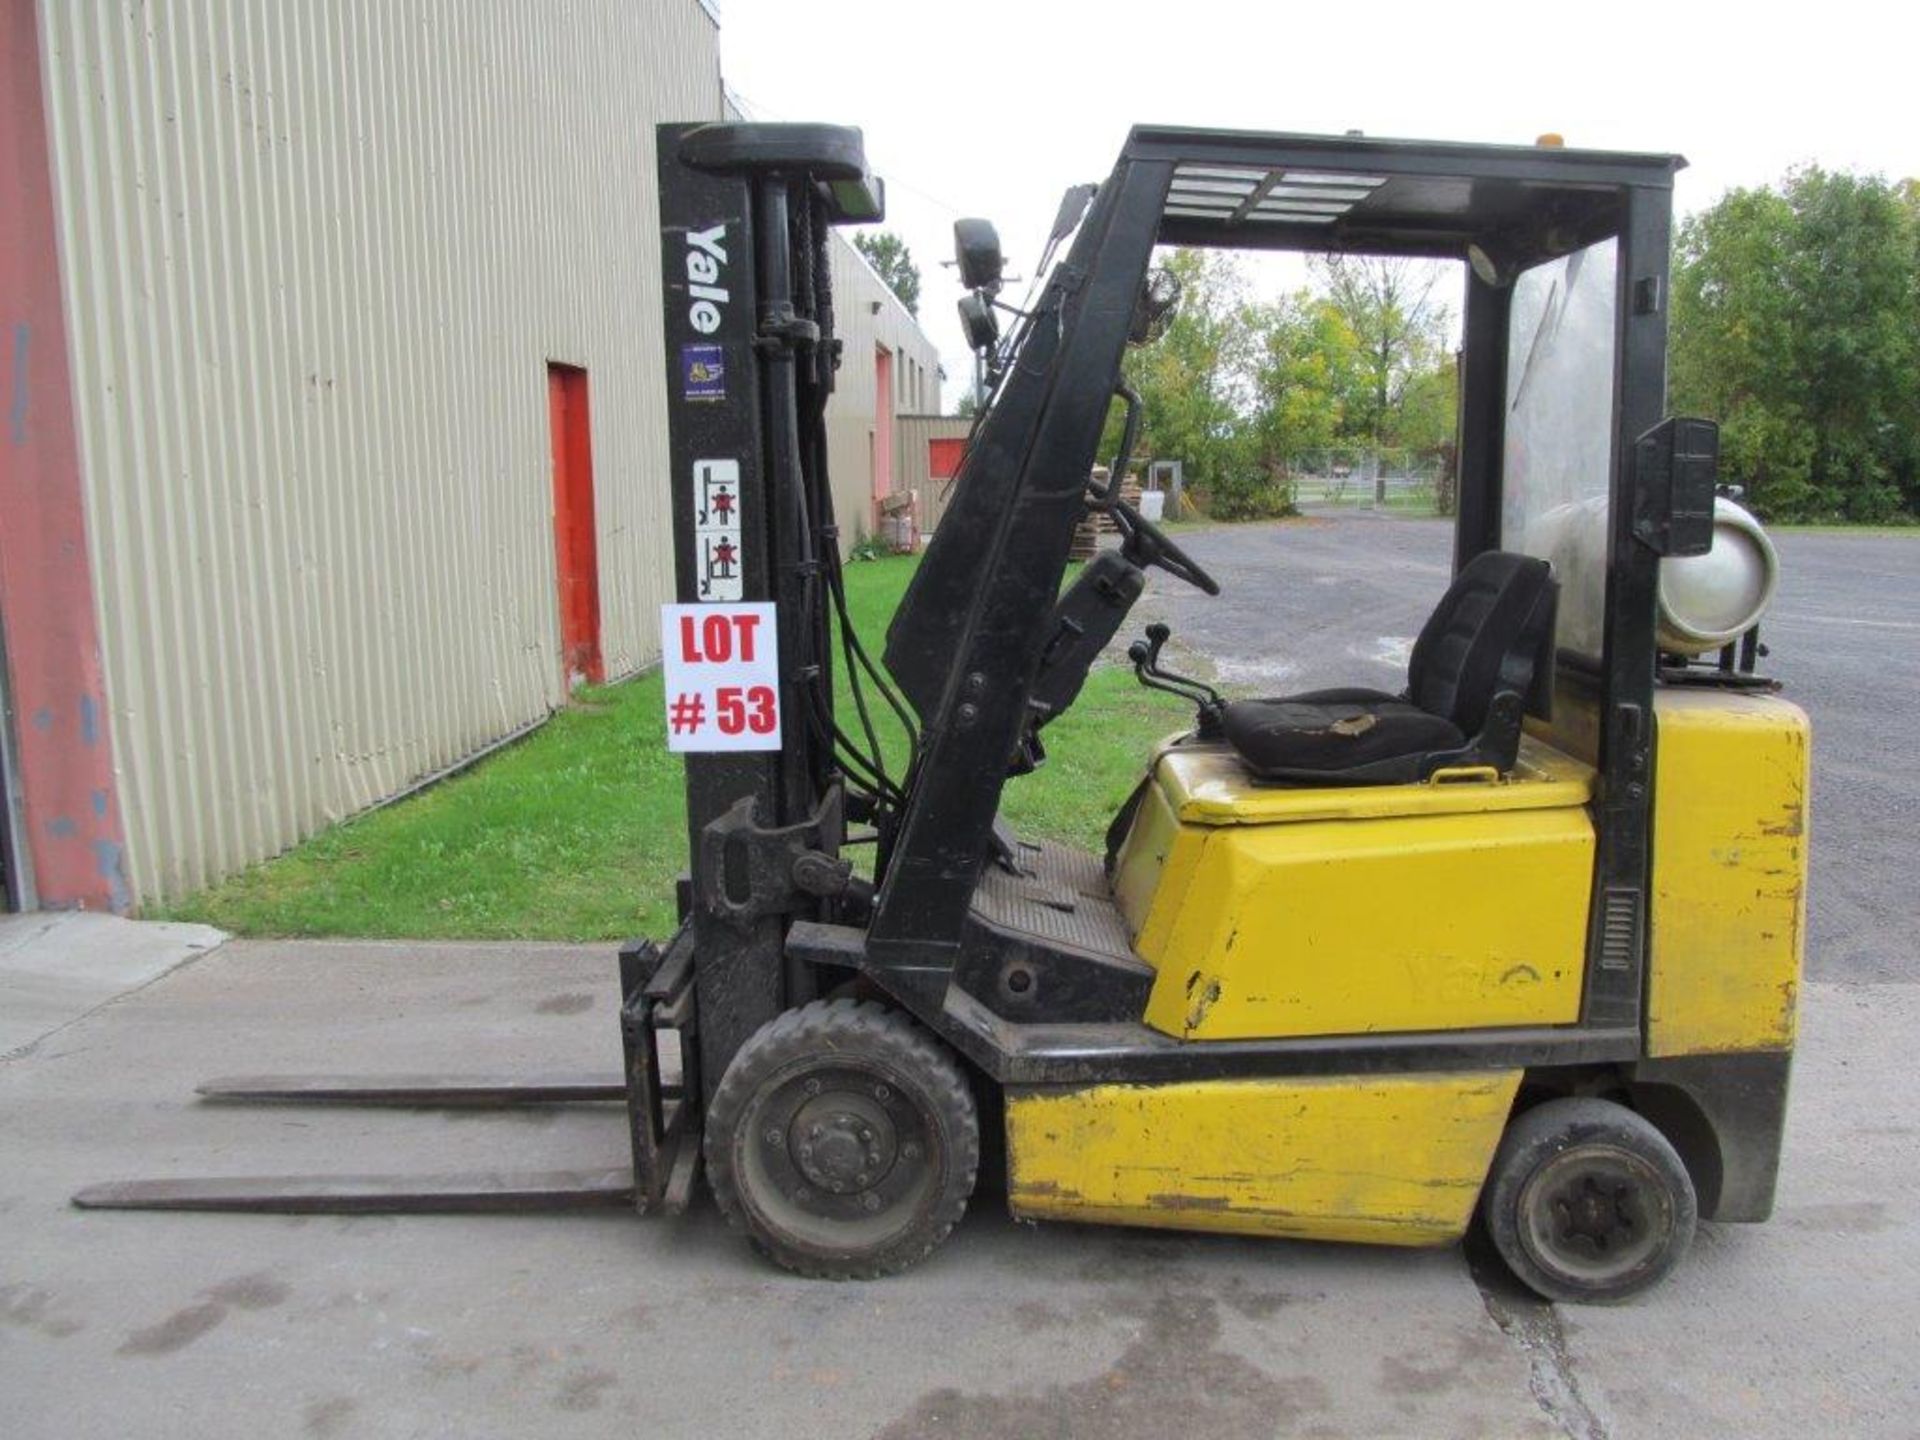 YALE PROPANE FORKLIFT MODEL: E466087, 5000 LBS CAP, INDOOR/OUTDOOR, "PROPANE TANK NOT INCLUDED" - Image 2 of 10